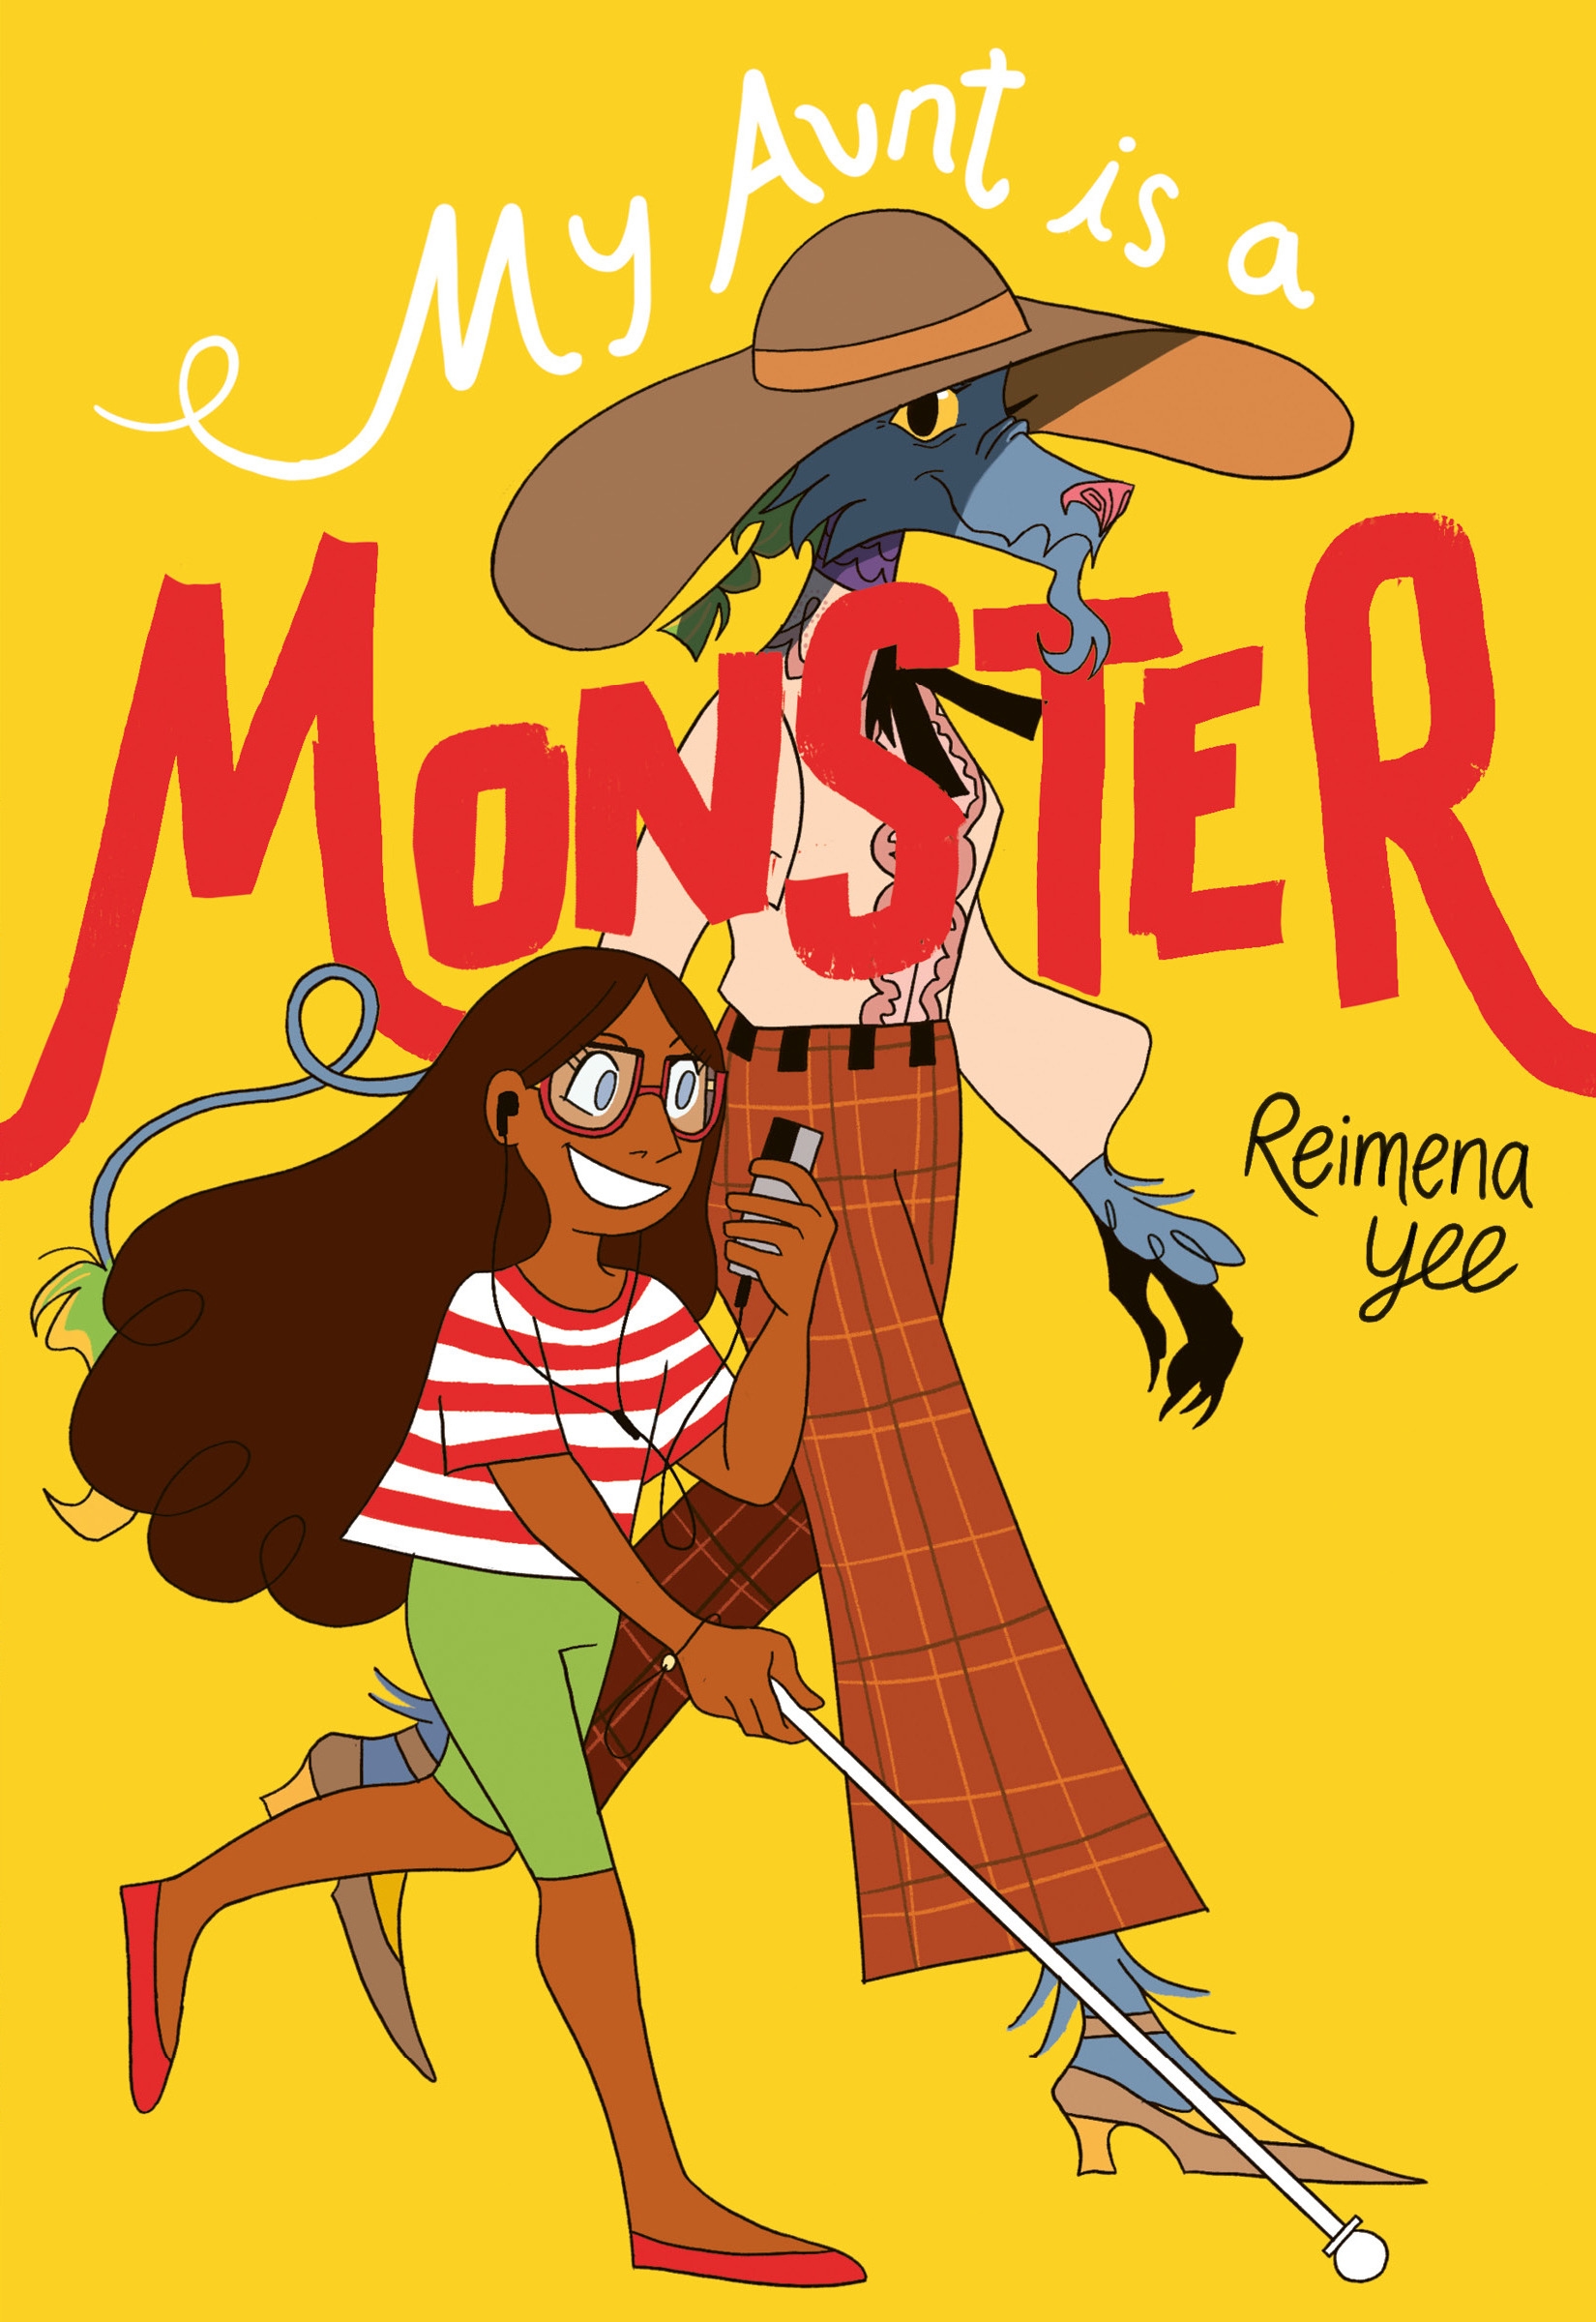 monster graphic novel book review